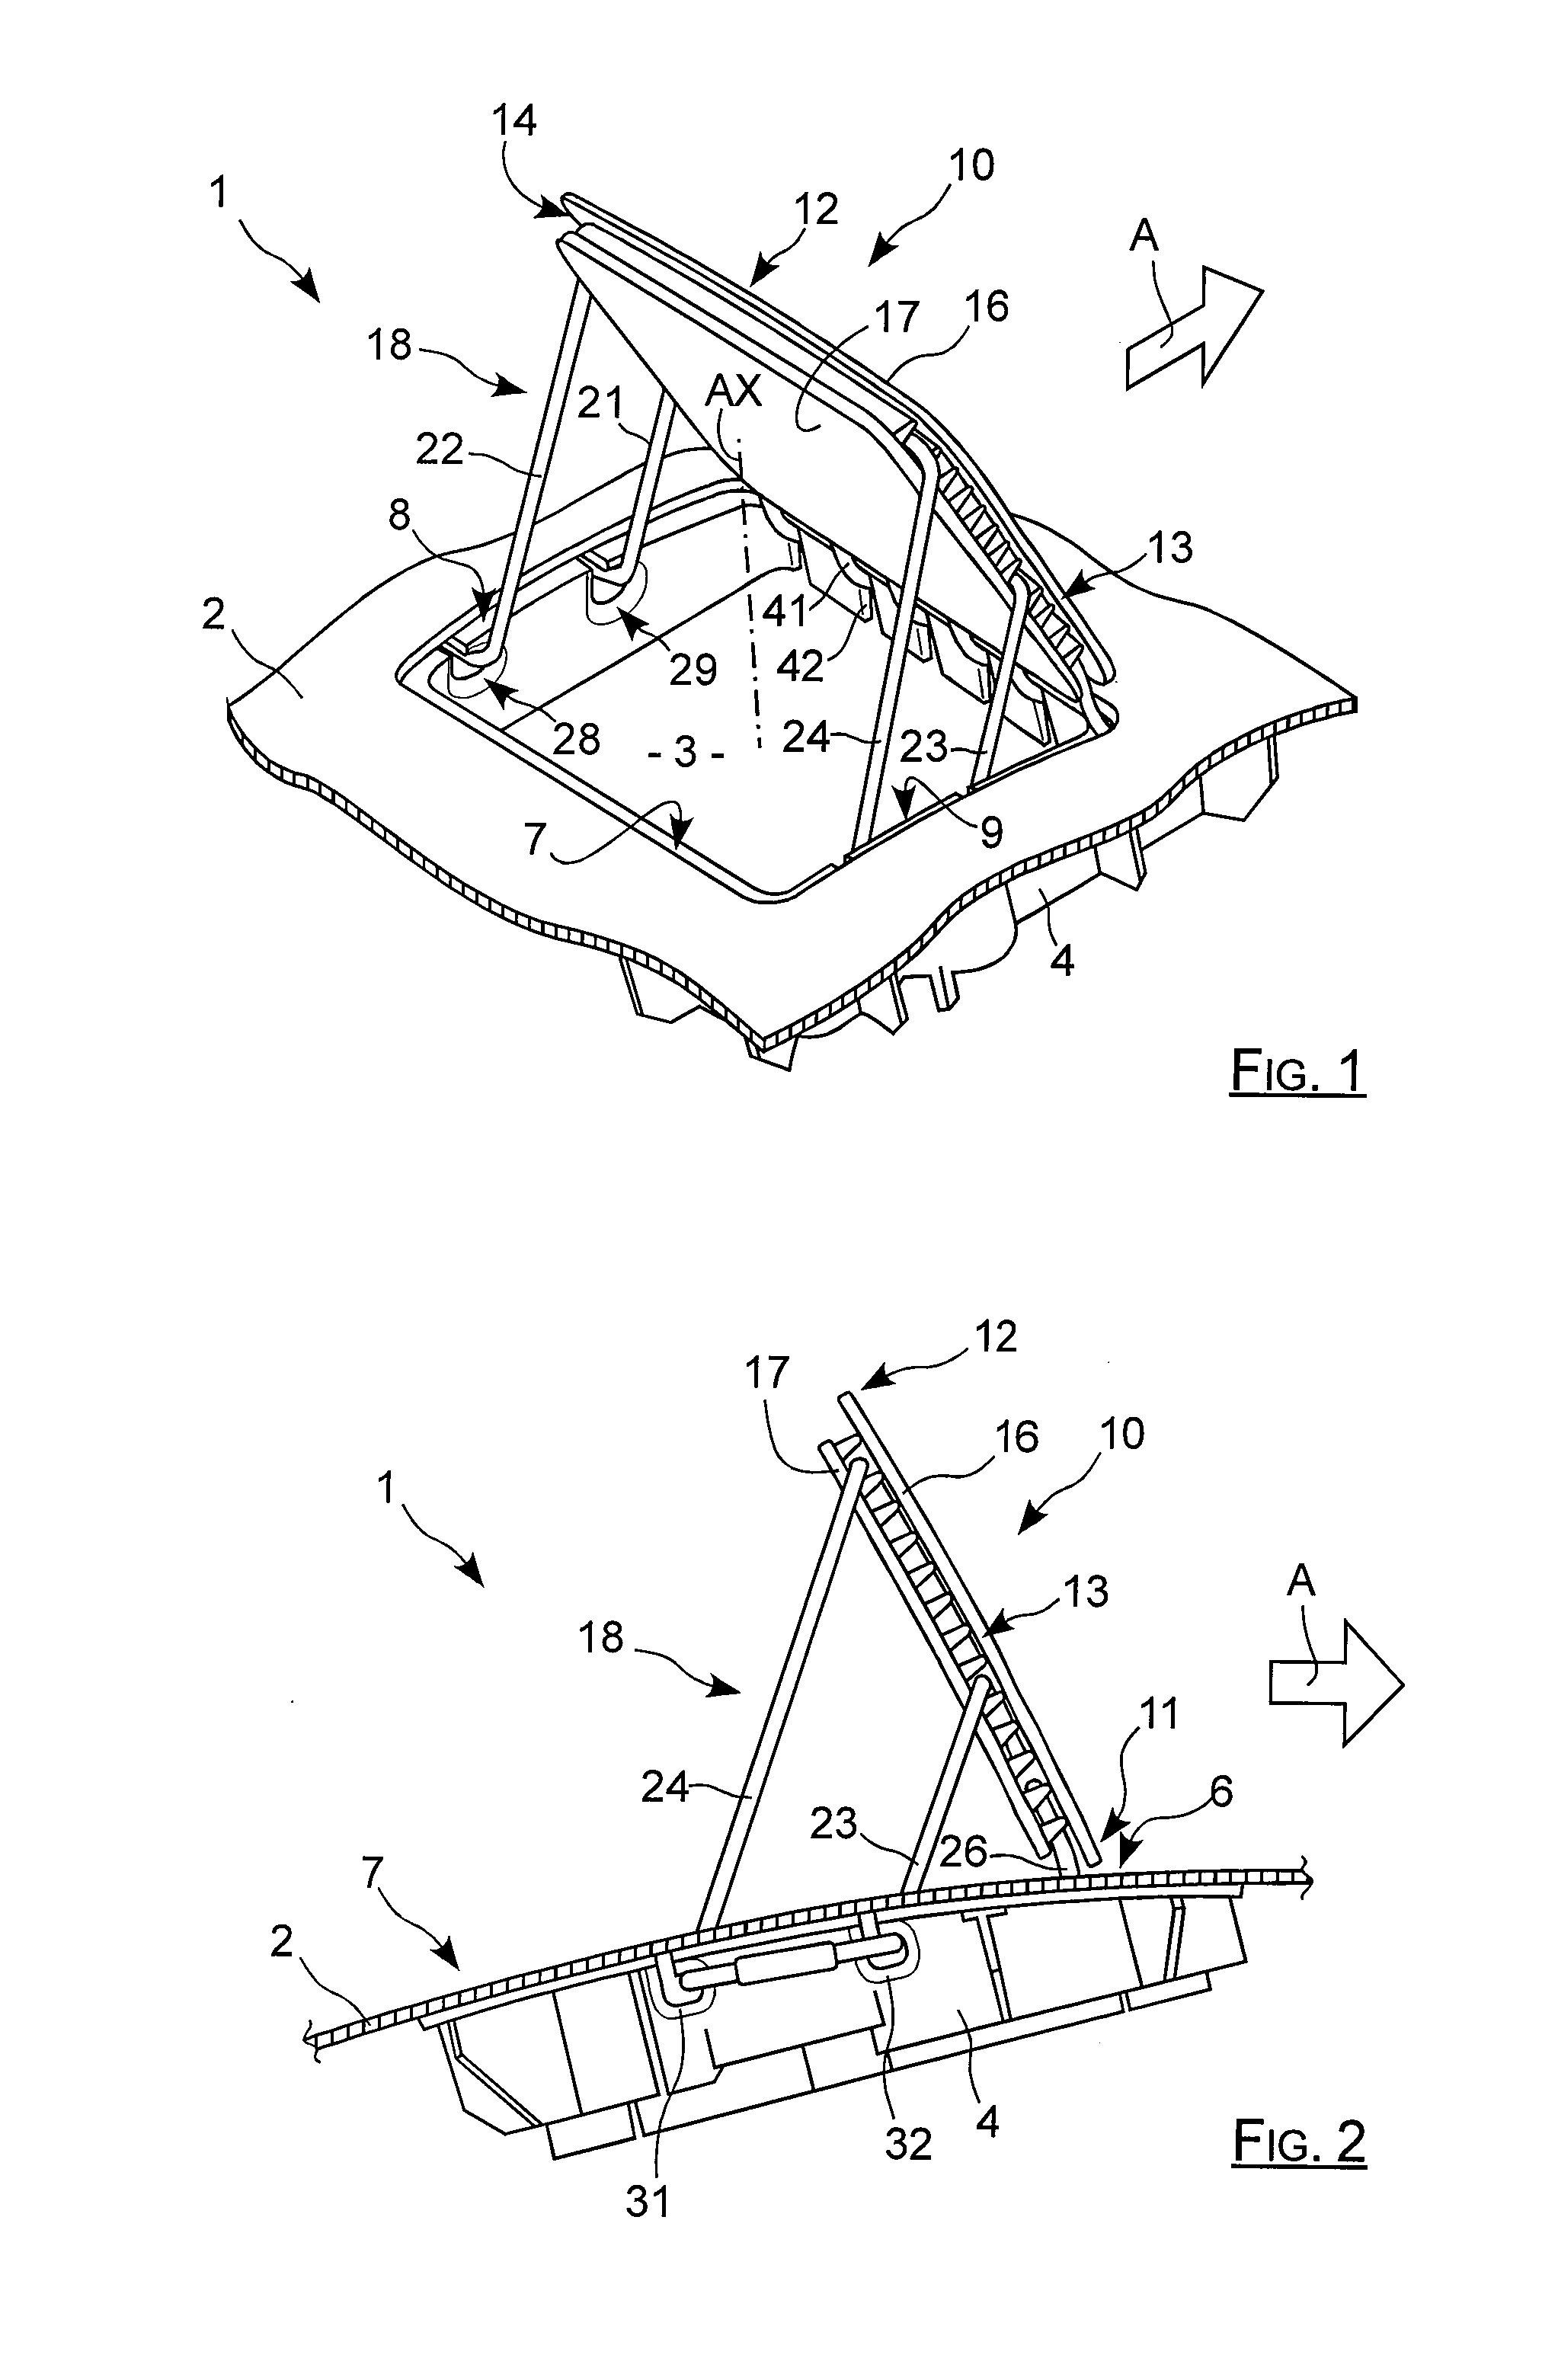 Inflatable airbag arrangement comprising a flap connected to an instrument panel by a linear link having four parallel retaining portions